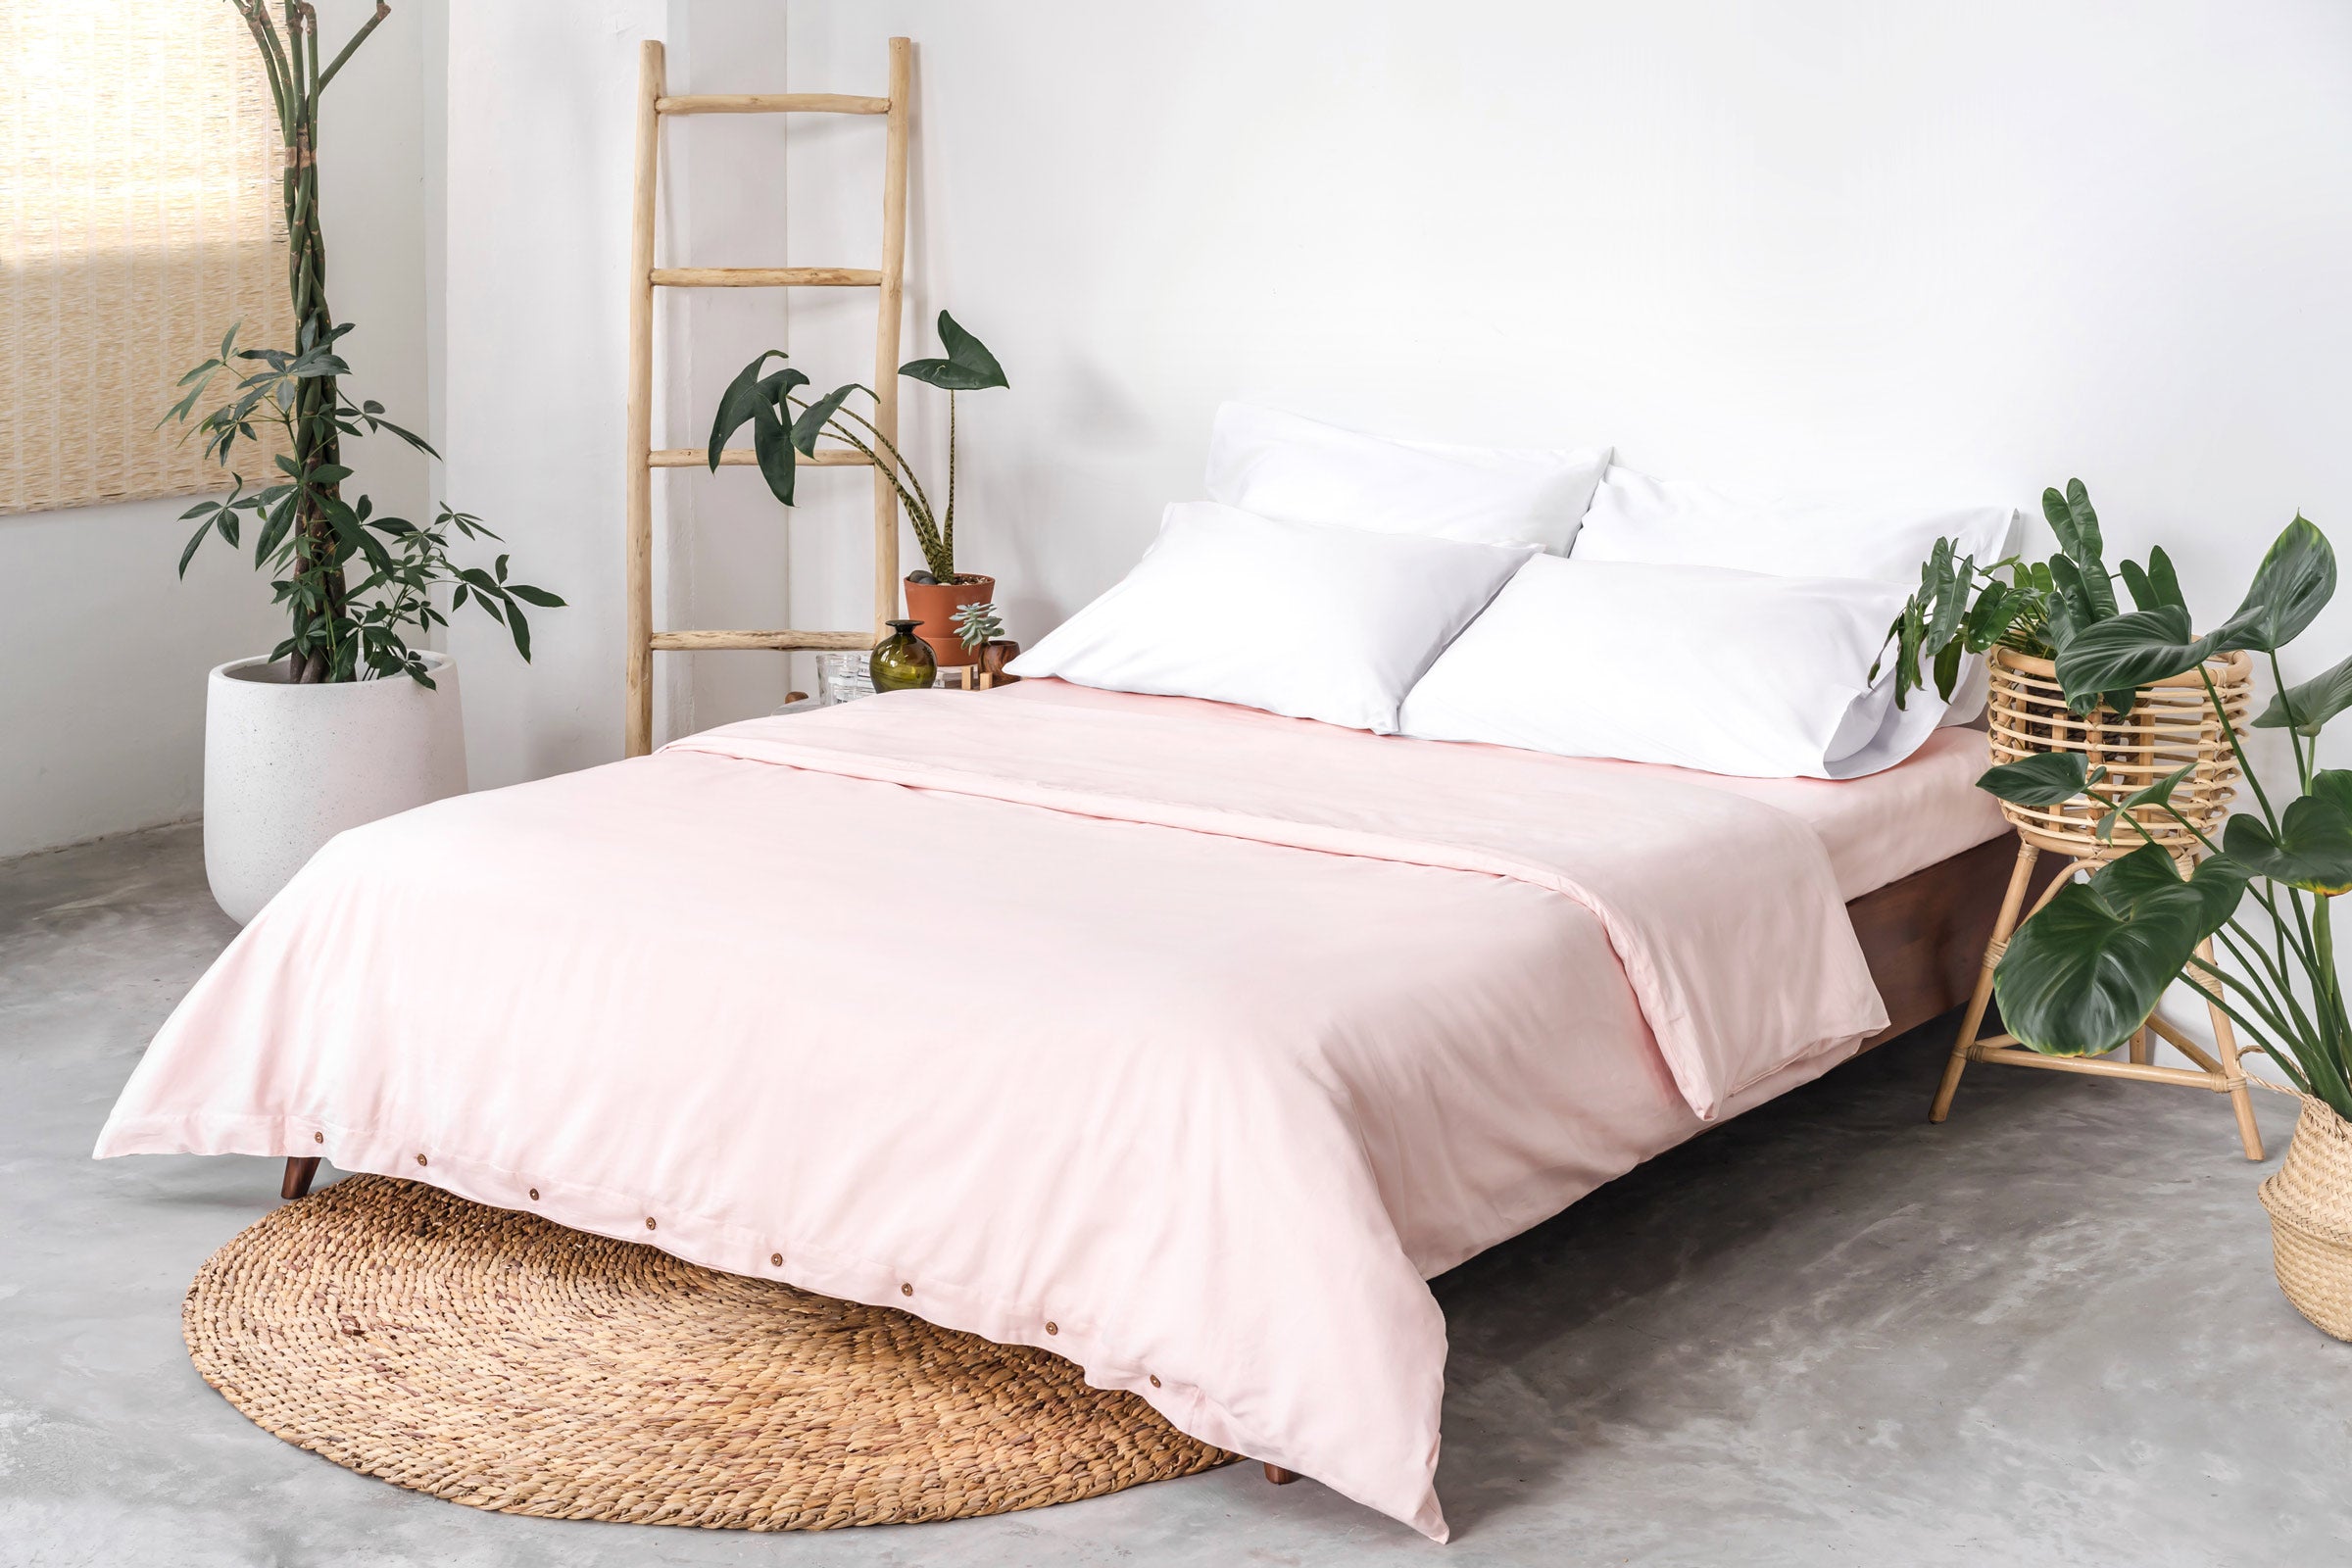 classic-blush-duvet-cover-fitted-sheet-white-pillowcase-pair-by-sojao.jpg